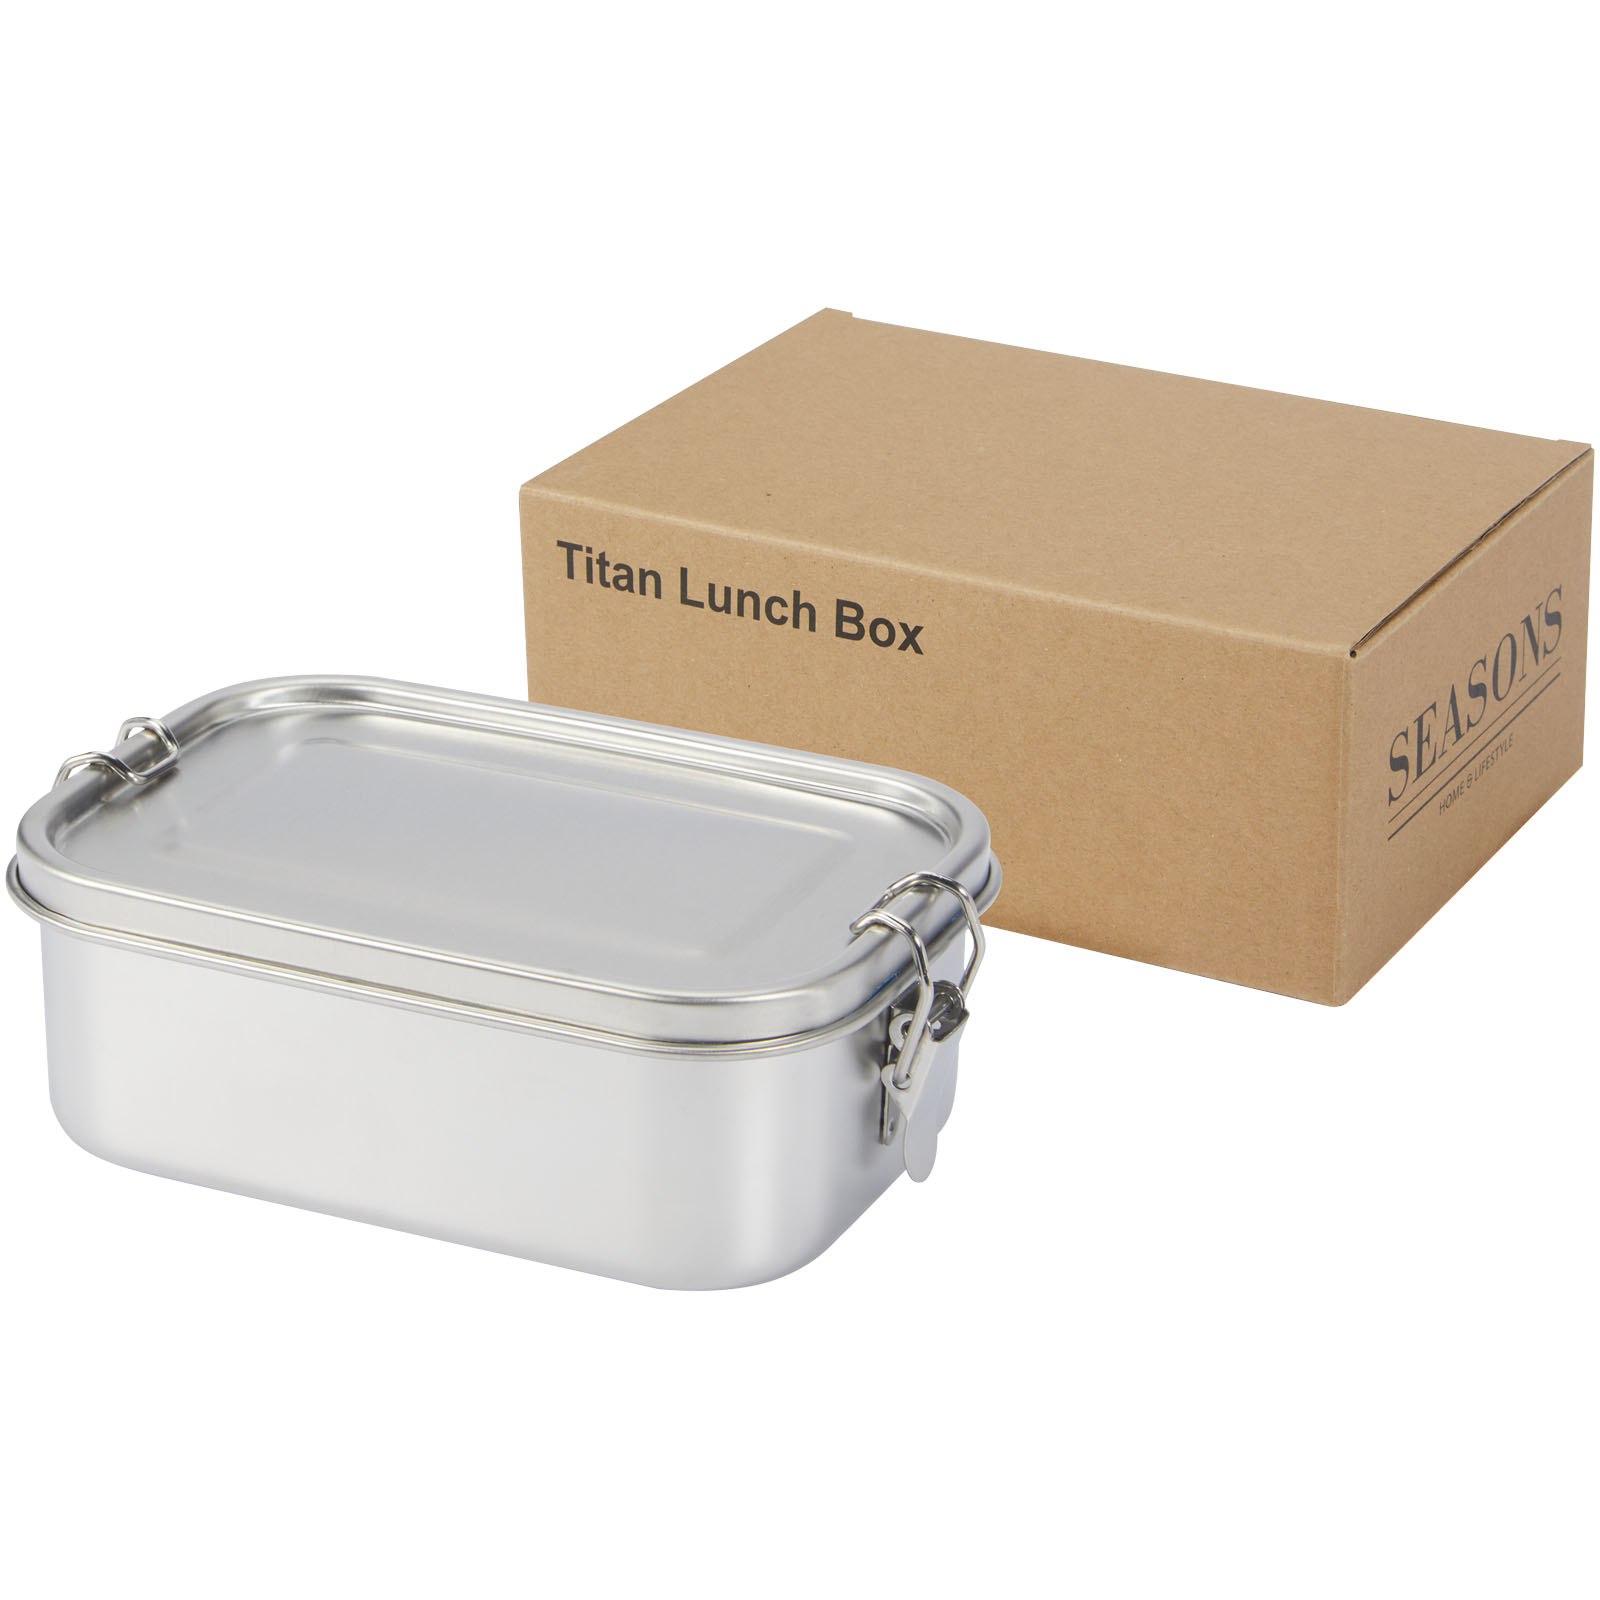 Lunch Boxes - Titan recycled stainless steel lunch box